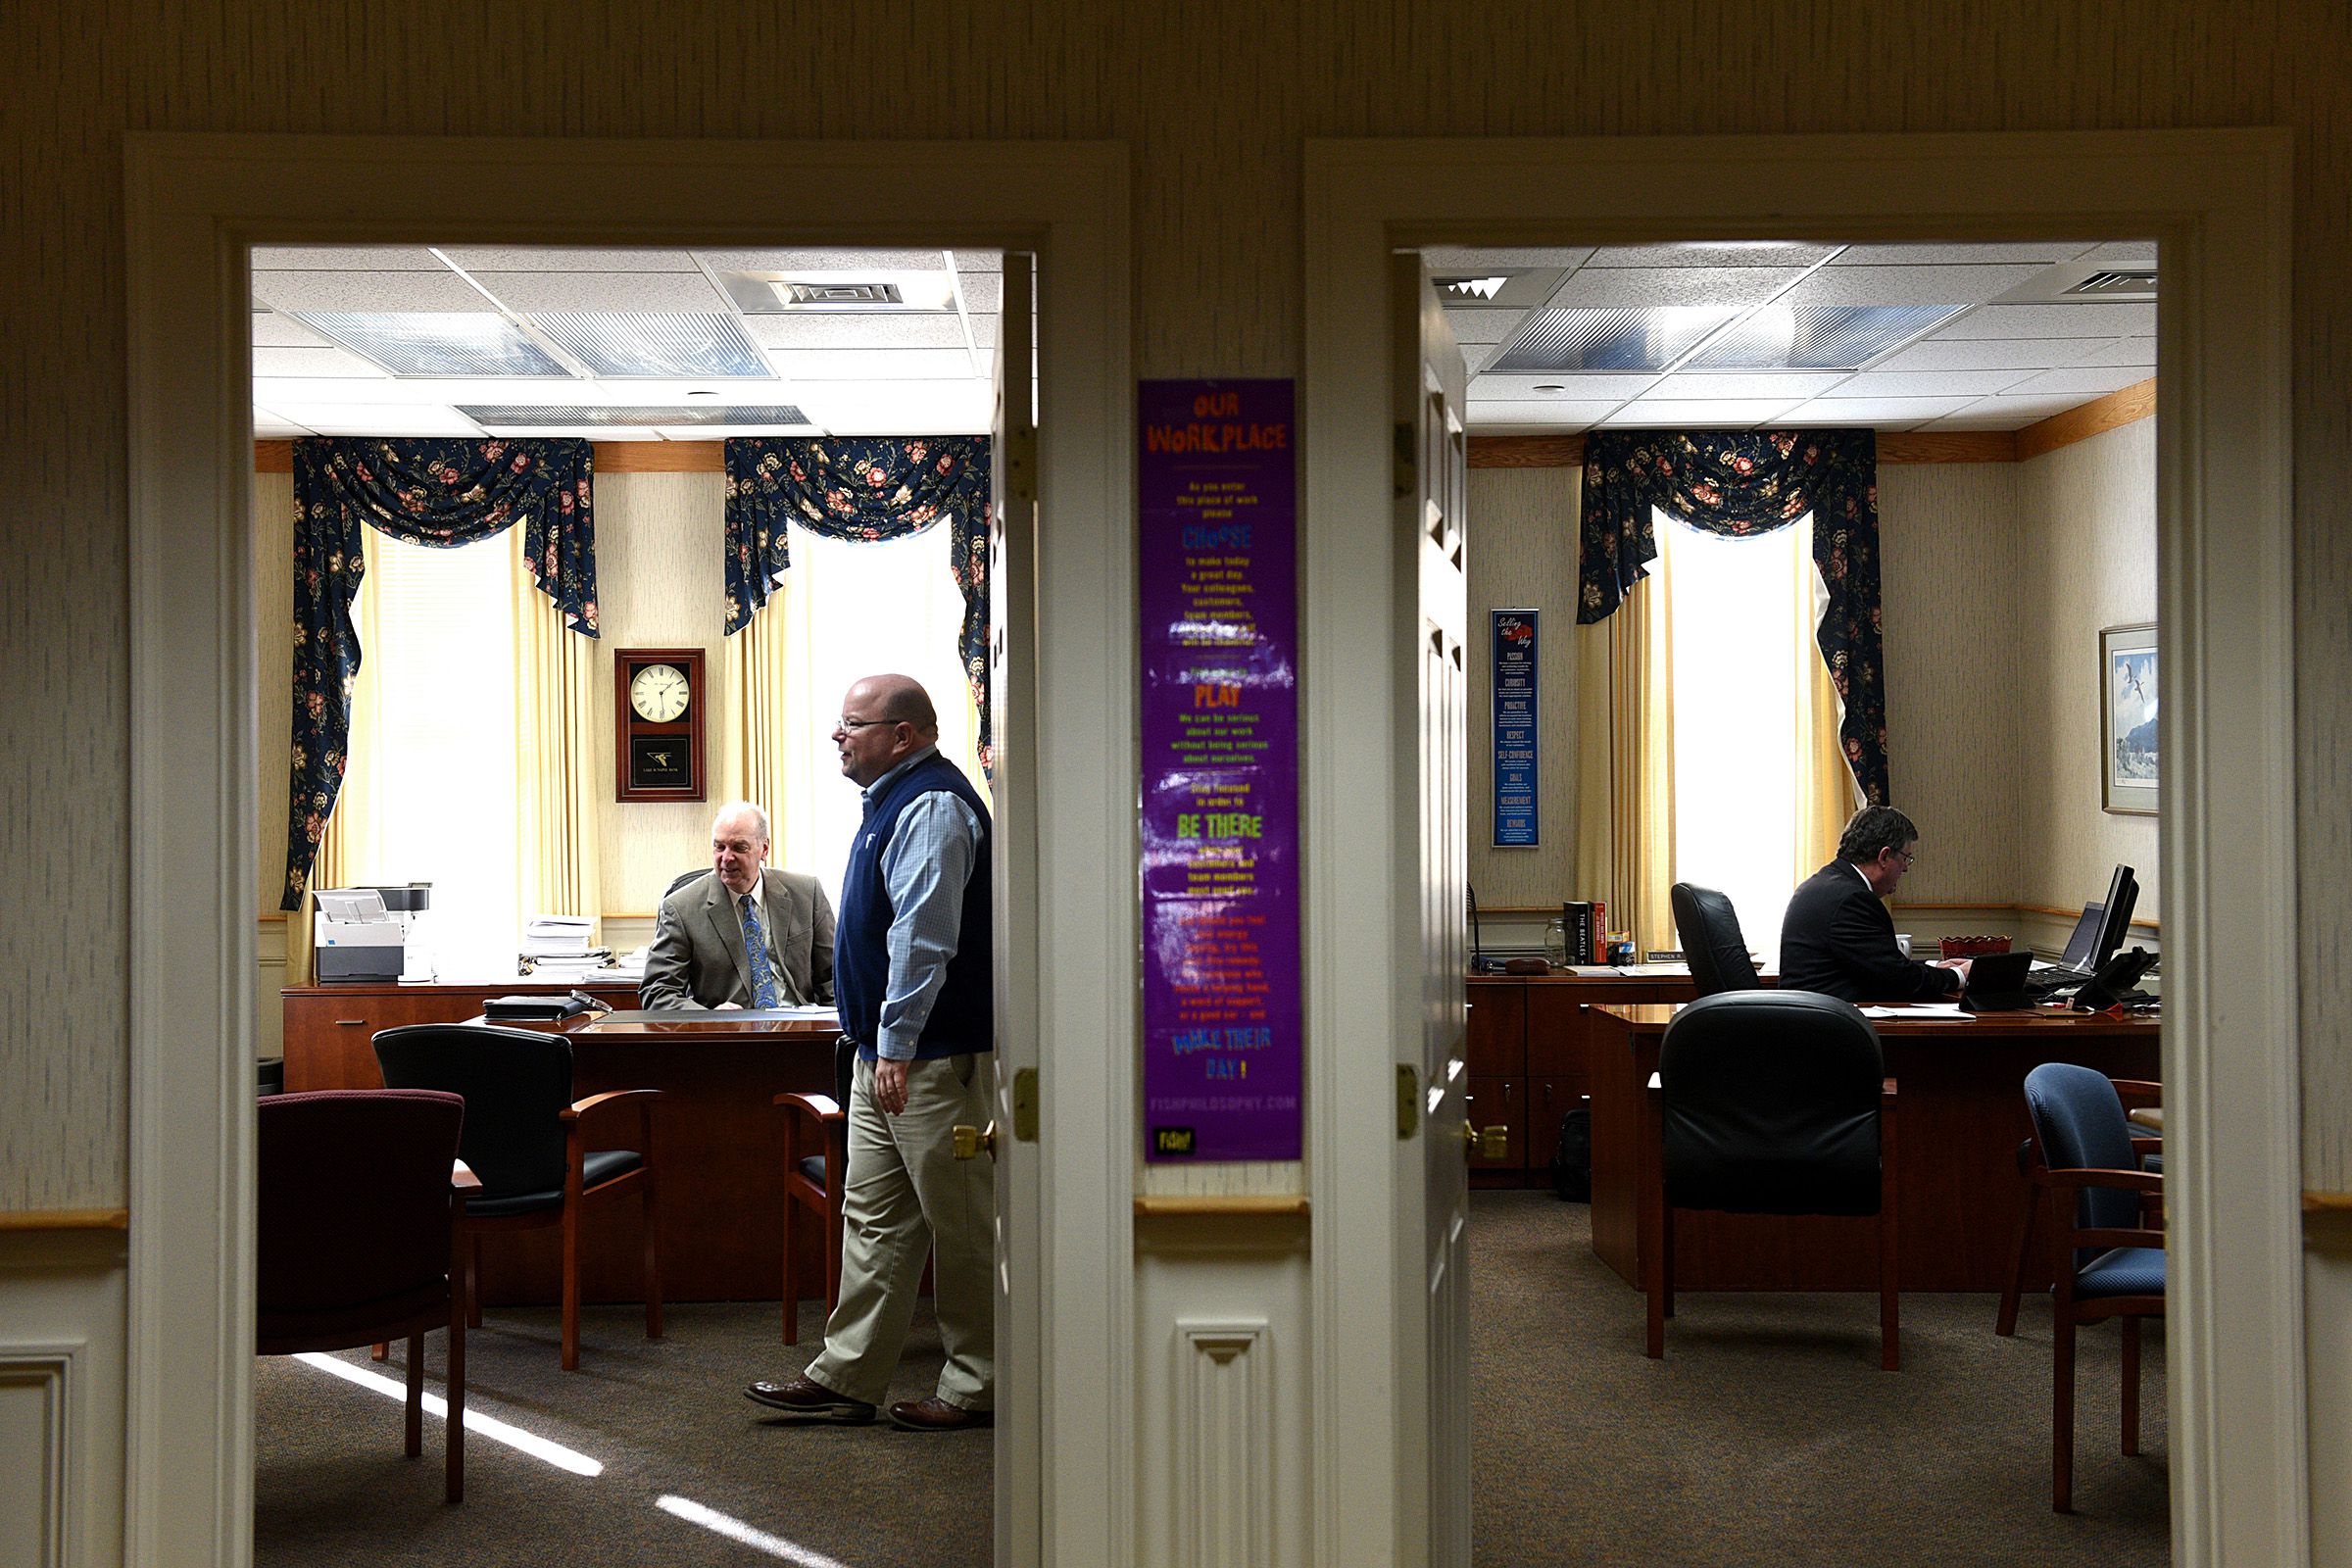 William McIver, who is now regional vice president for Lake Sunapee Bank, left, speaks with Tyler Gilday, senior vice president and director of retail lending, in McIver’s office in Newport. At far right is outgoing CEO Stephen Theroux.